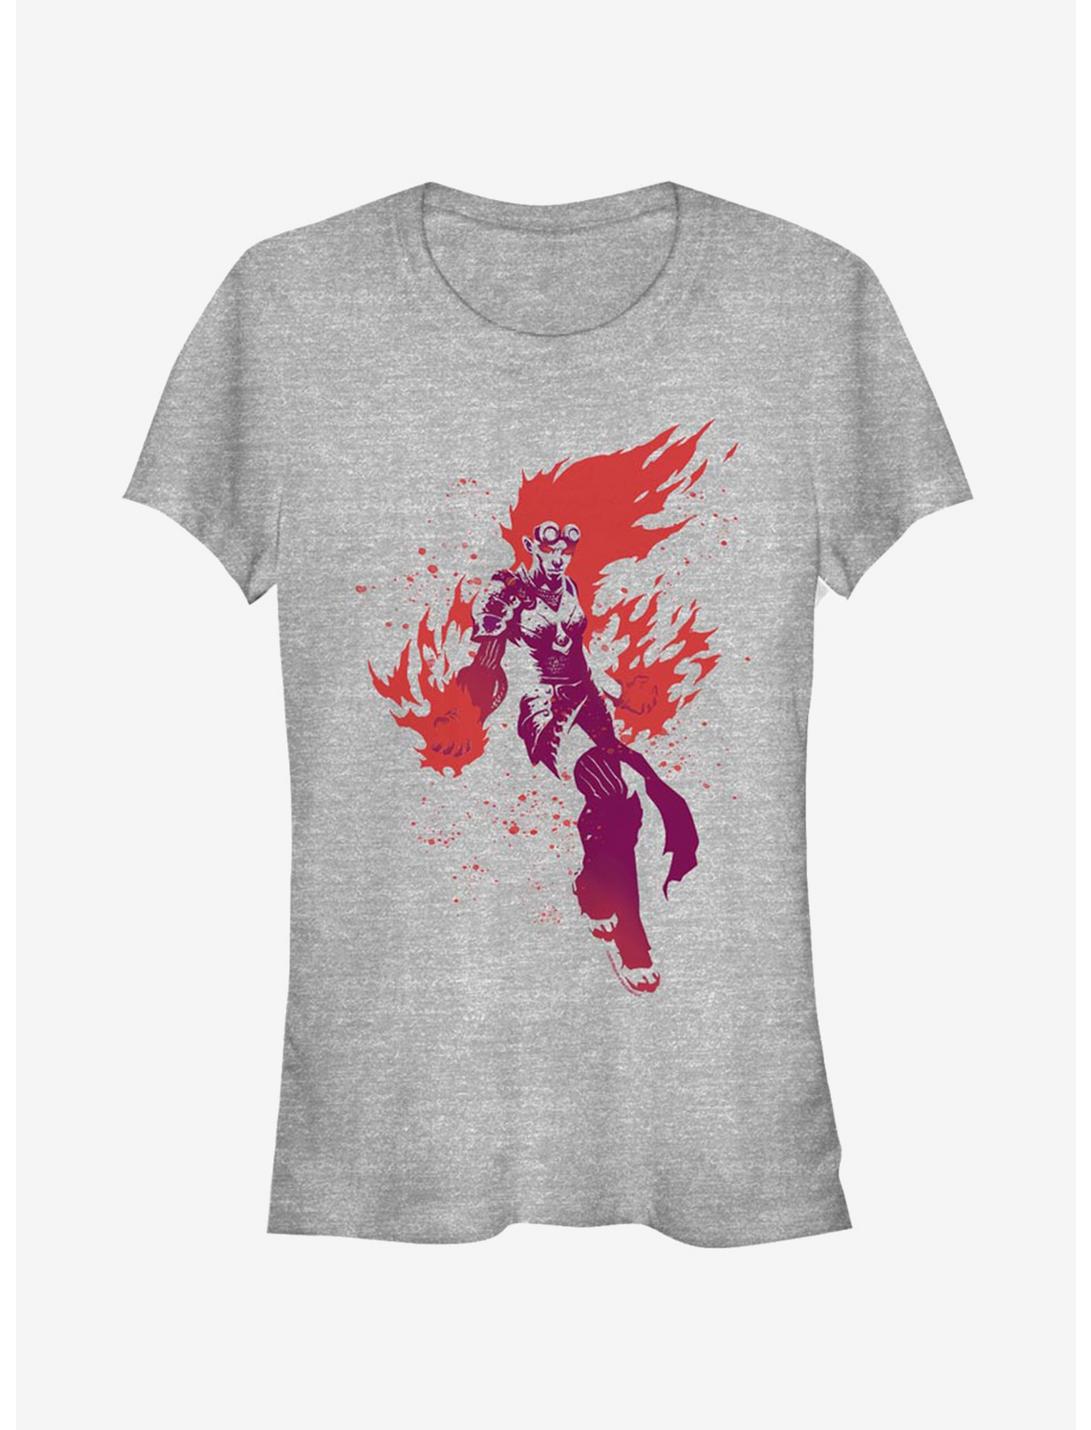 Magic: The Gathering Chandra in Action Girls T-Shirt, ATH HTR, hi-res